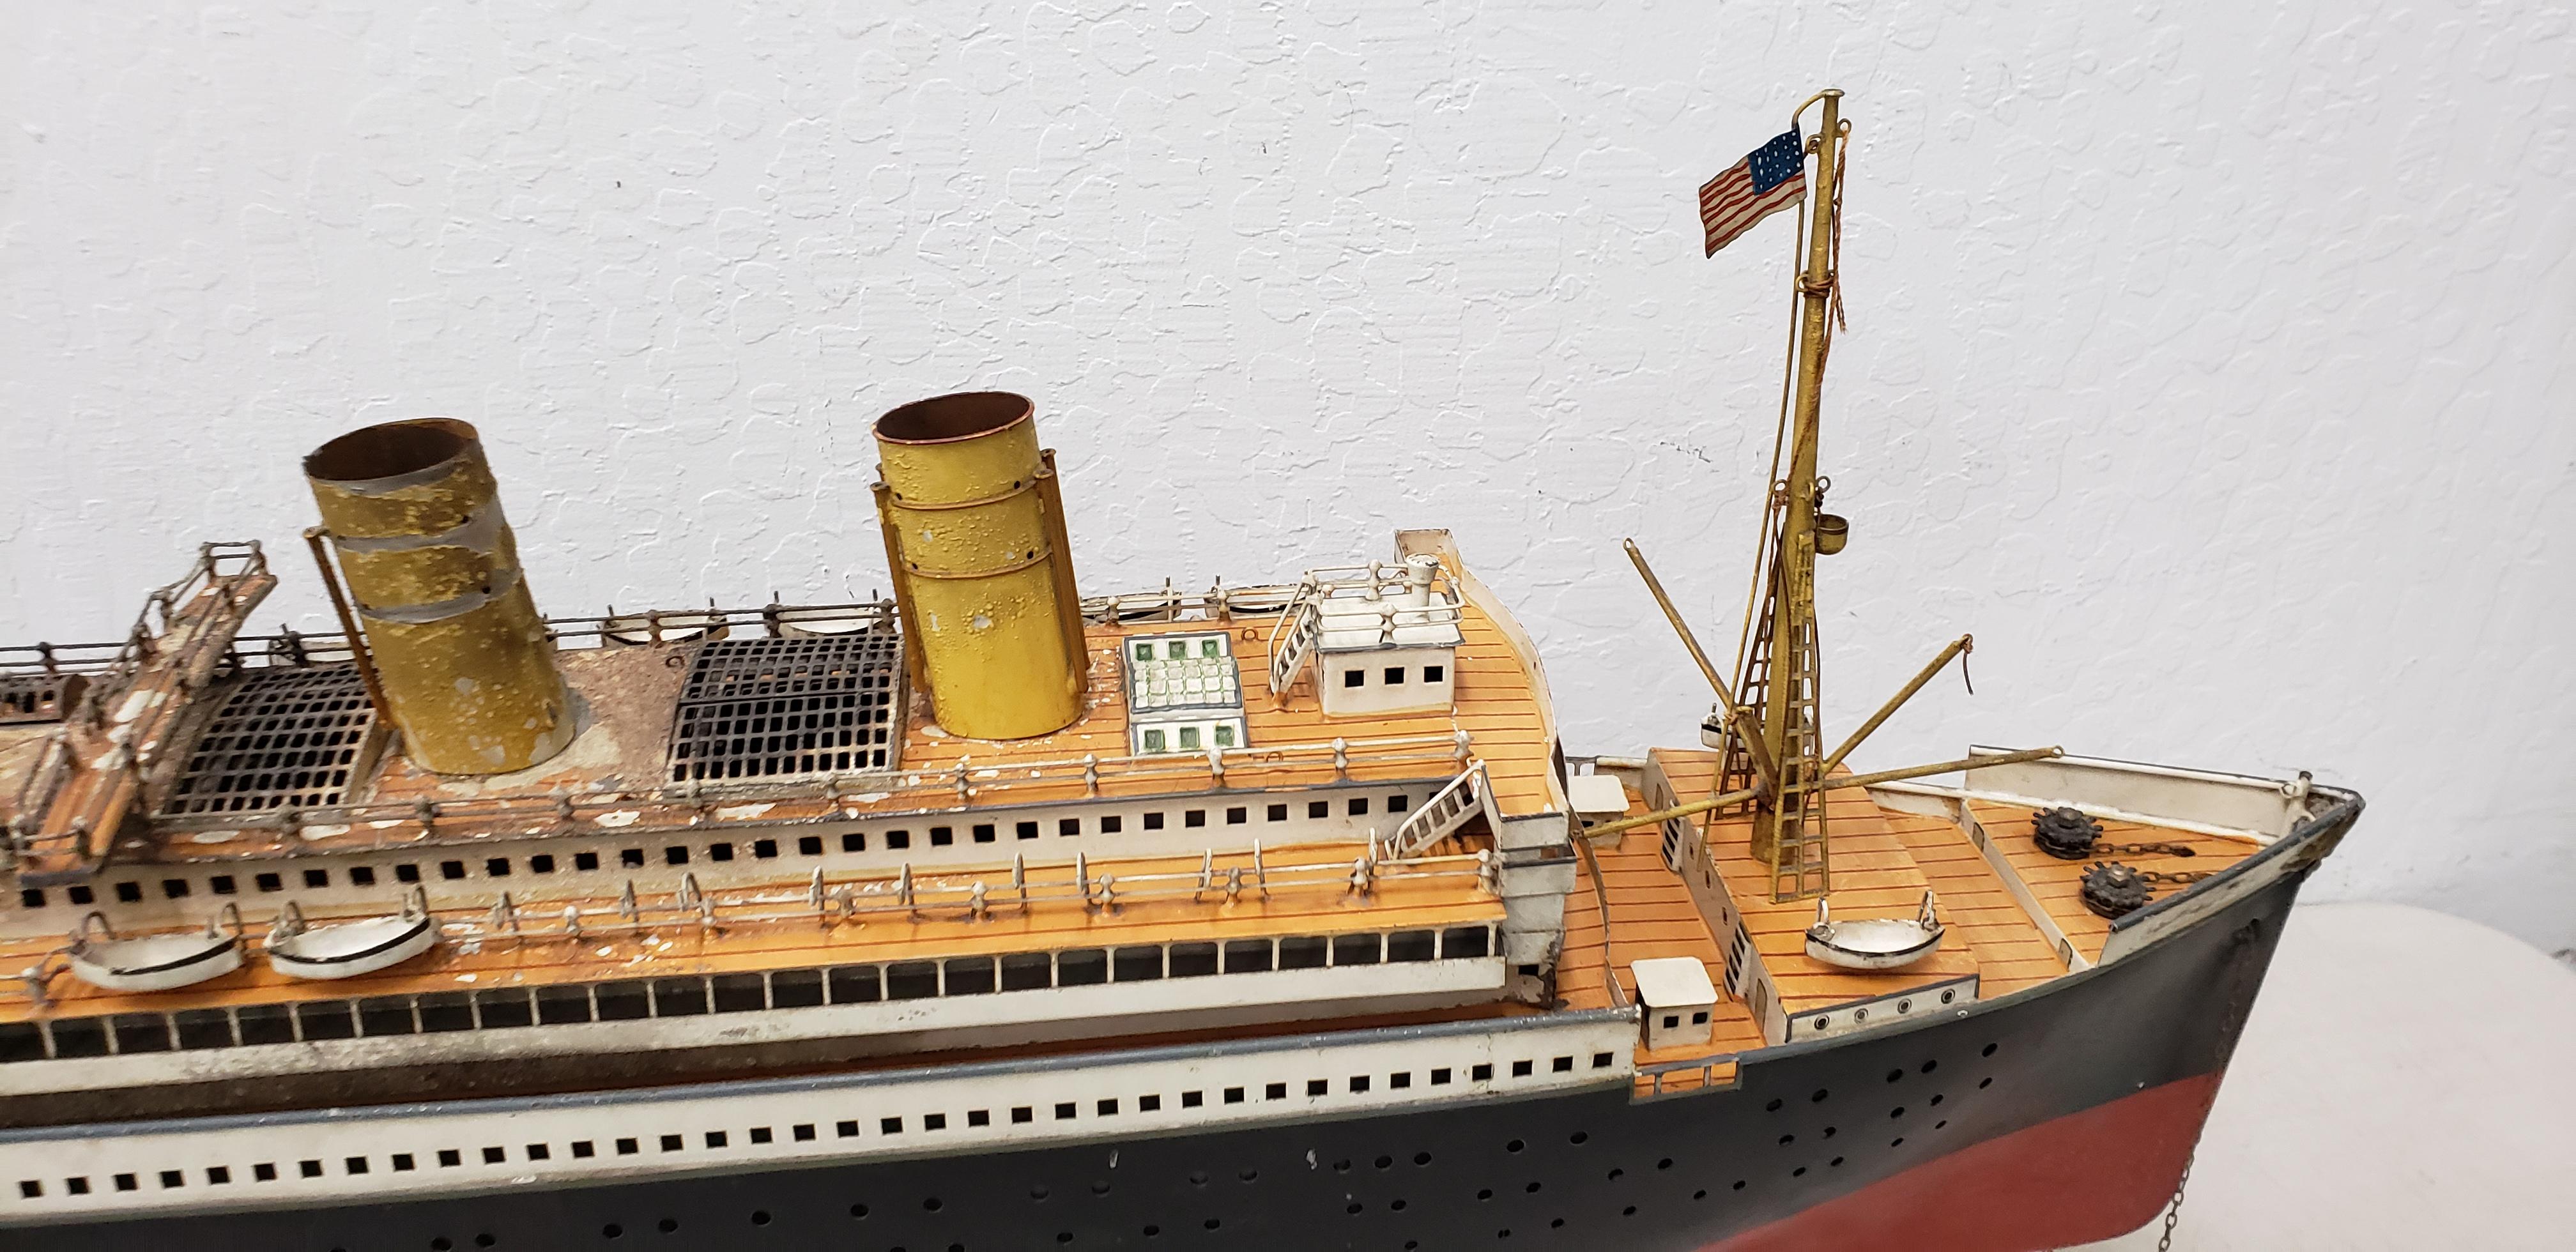 Antique Marklin Ocean Liner with American Flags and Lifeboats, circa 1900 For Sale 1